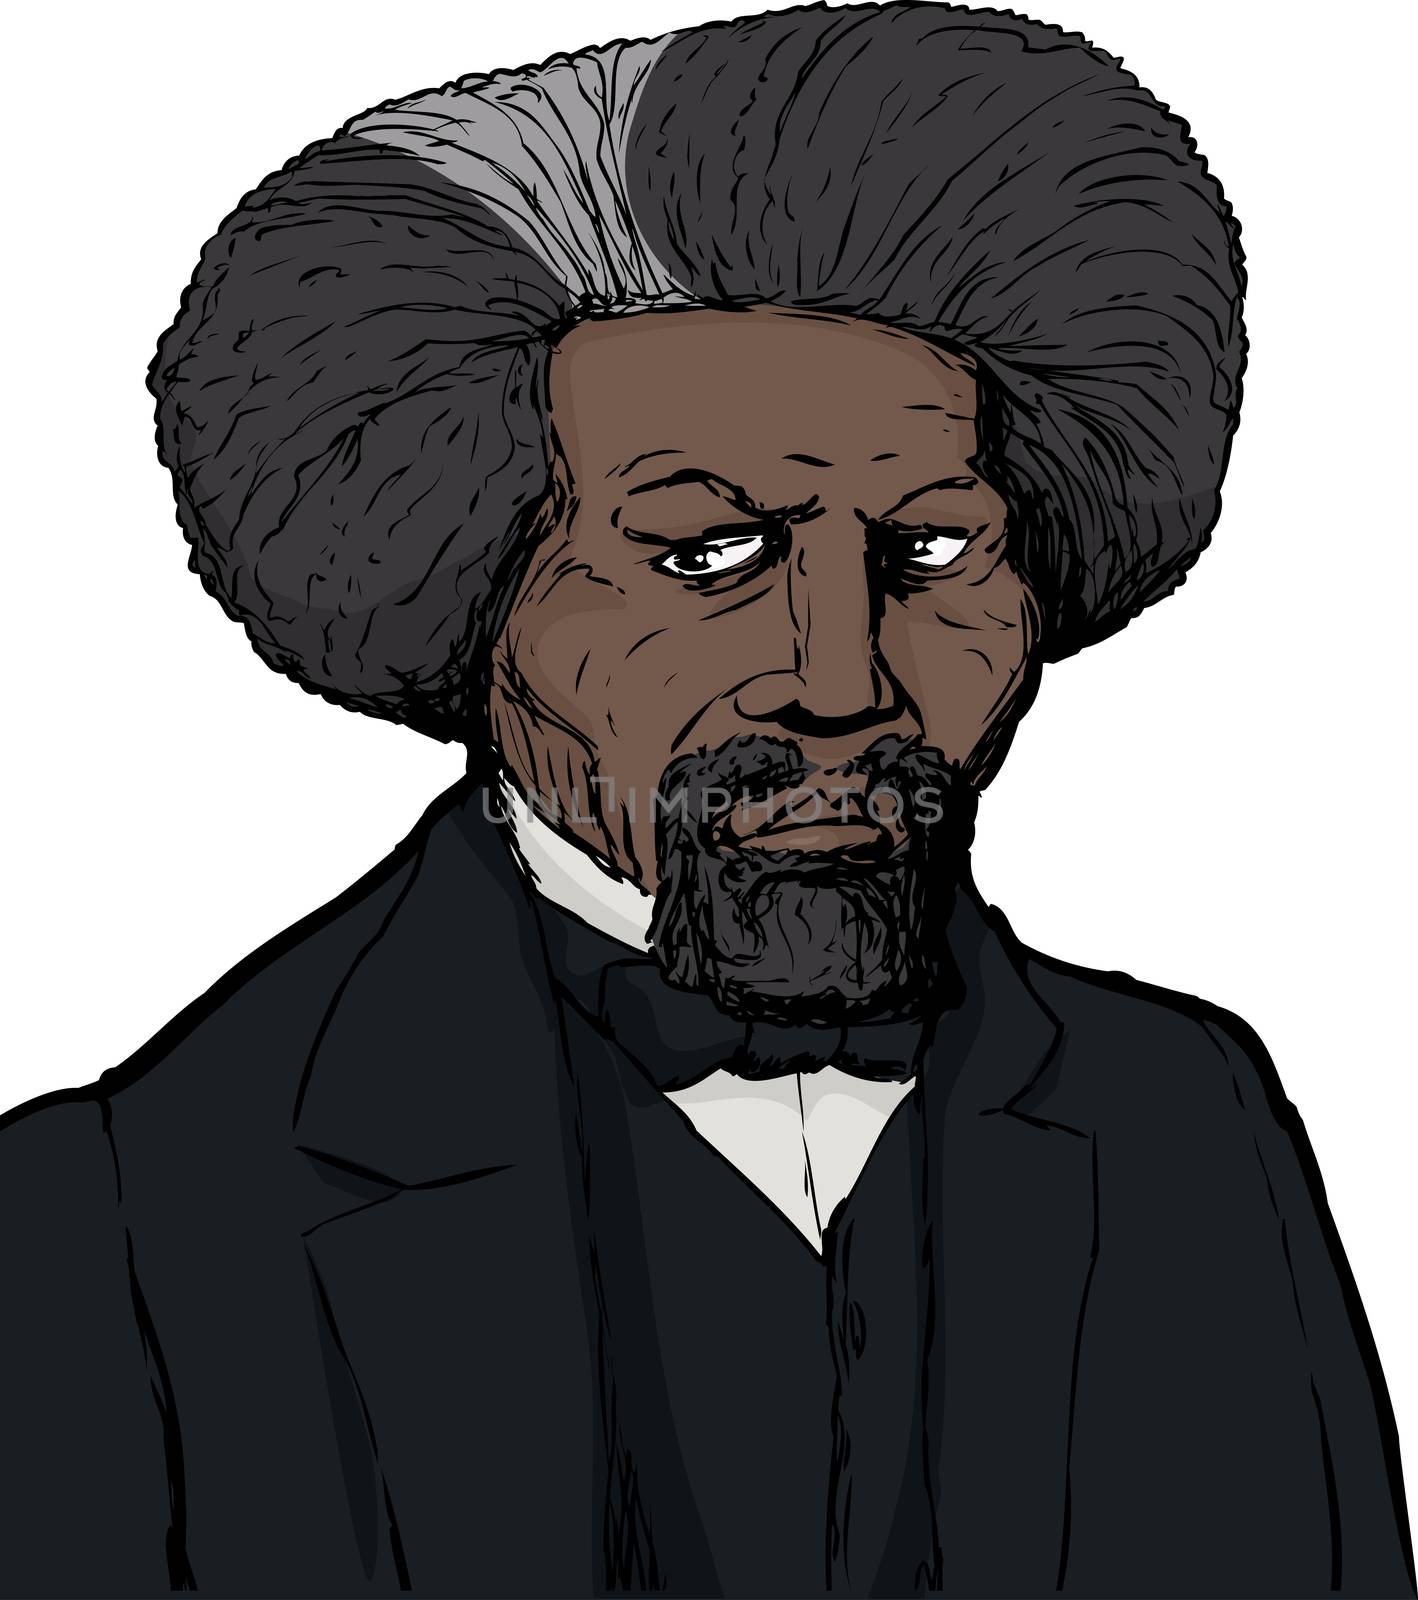 Frederick Douglass Sketch in Color Over White by TheBlackRhino